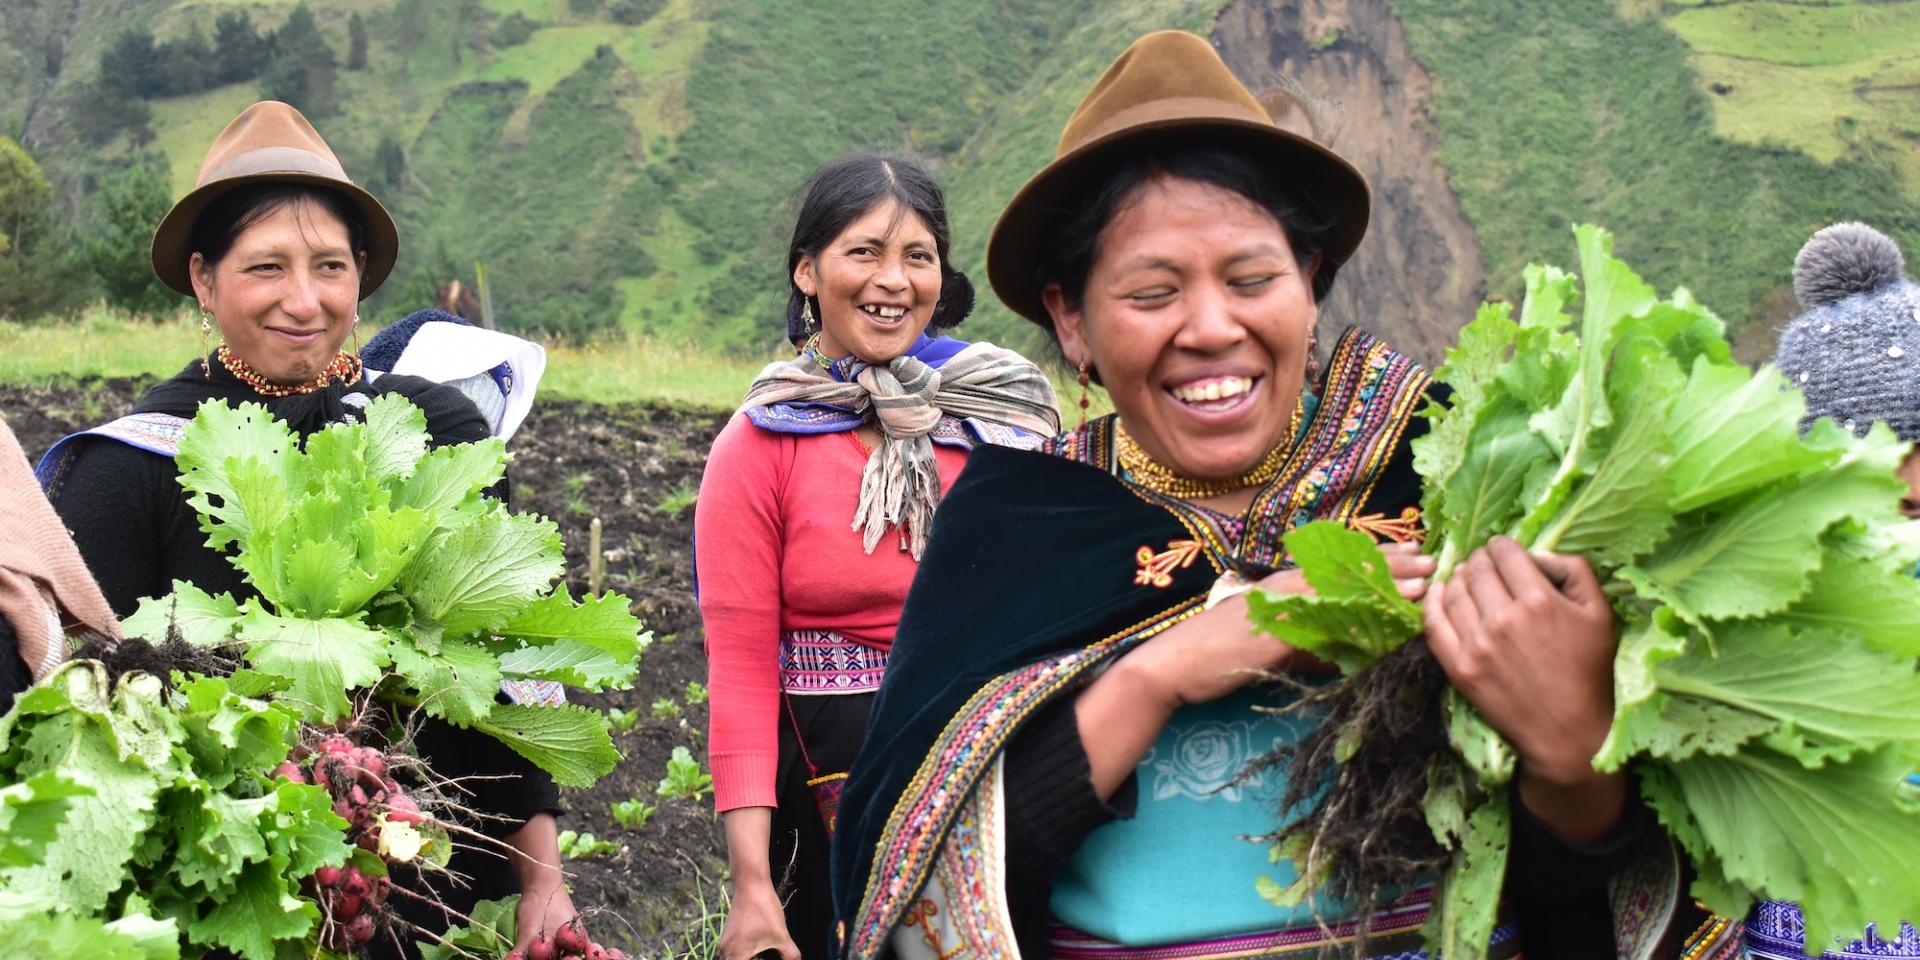 Andean women holding green plants